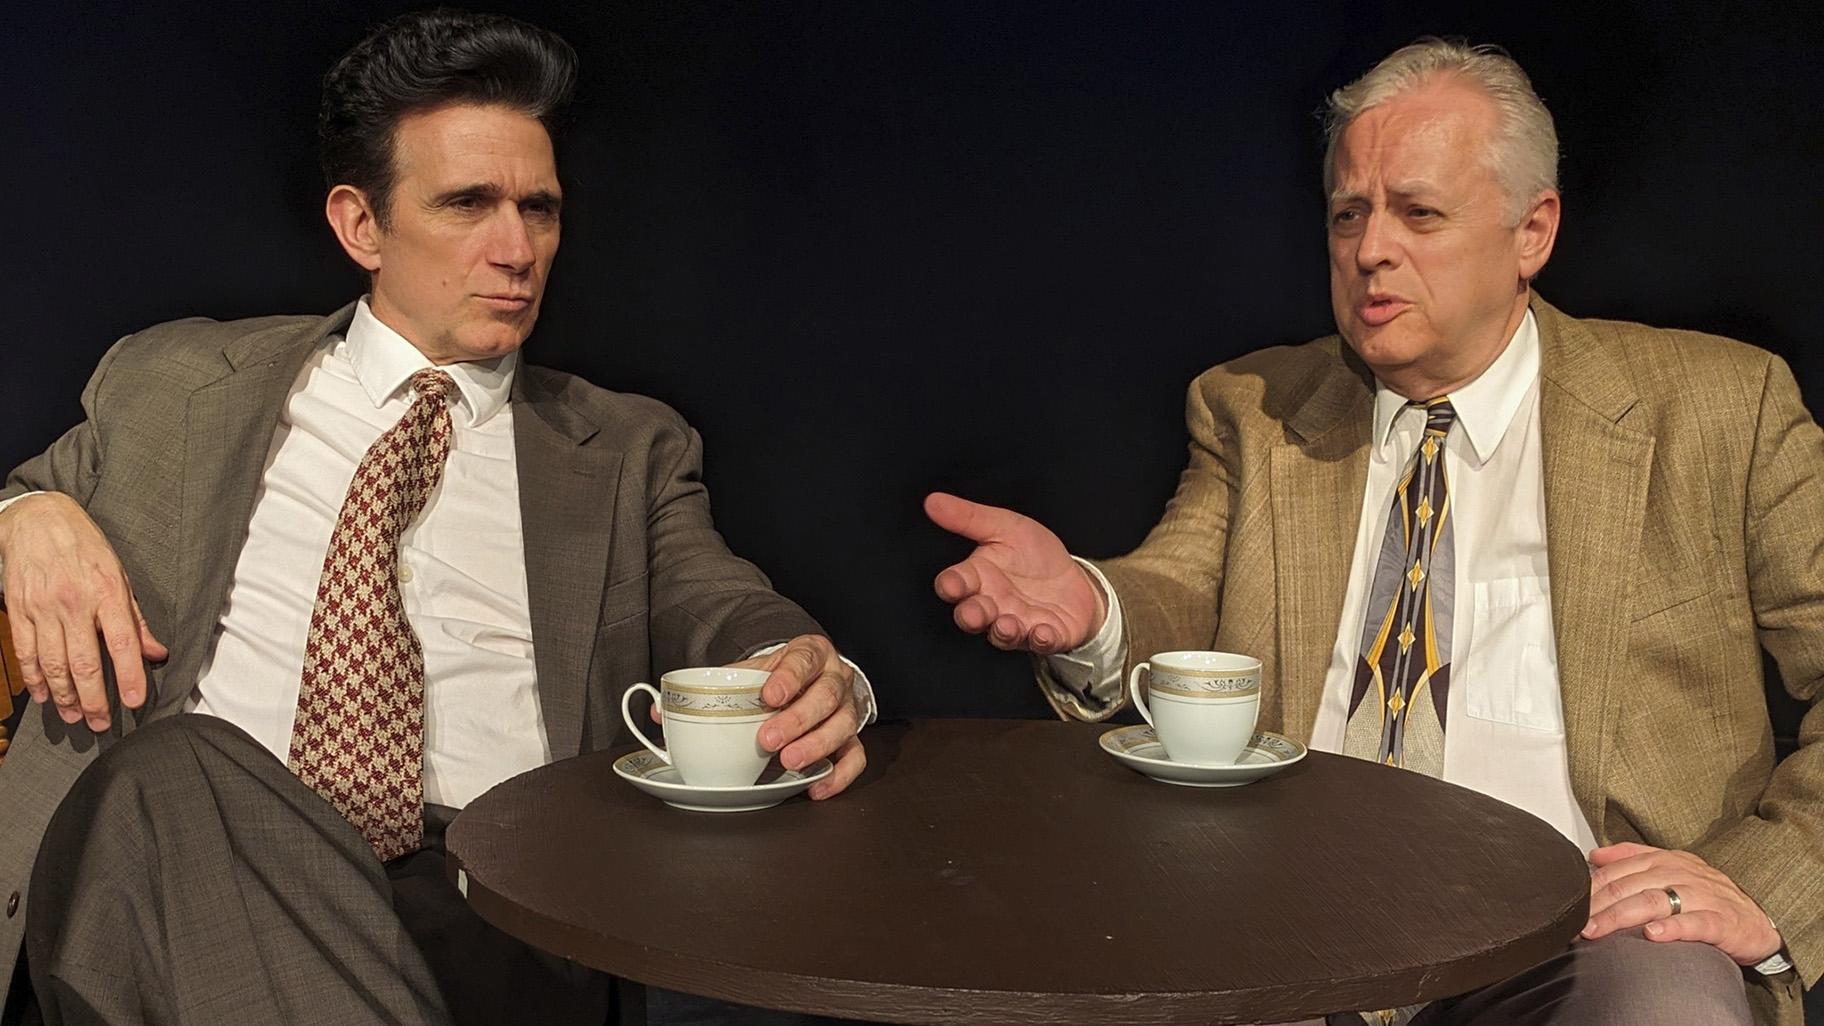 Ronnie Marmo, left, as Bill Wilson and Steve Gelder as Dr. Bob Smith in “Bill W. and Dr. Bob.” (Credit: Cortney Roles)